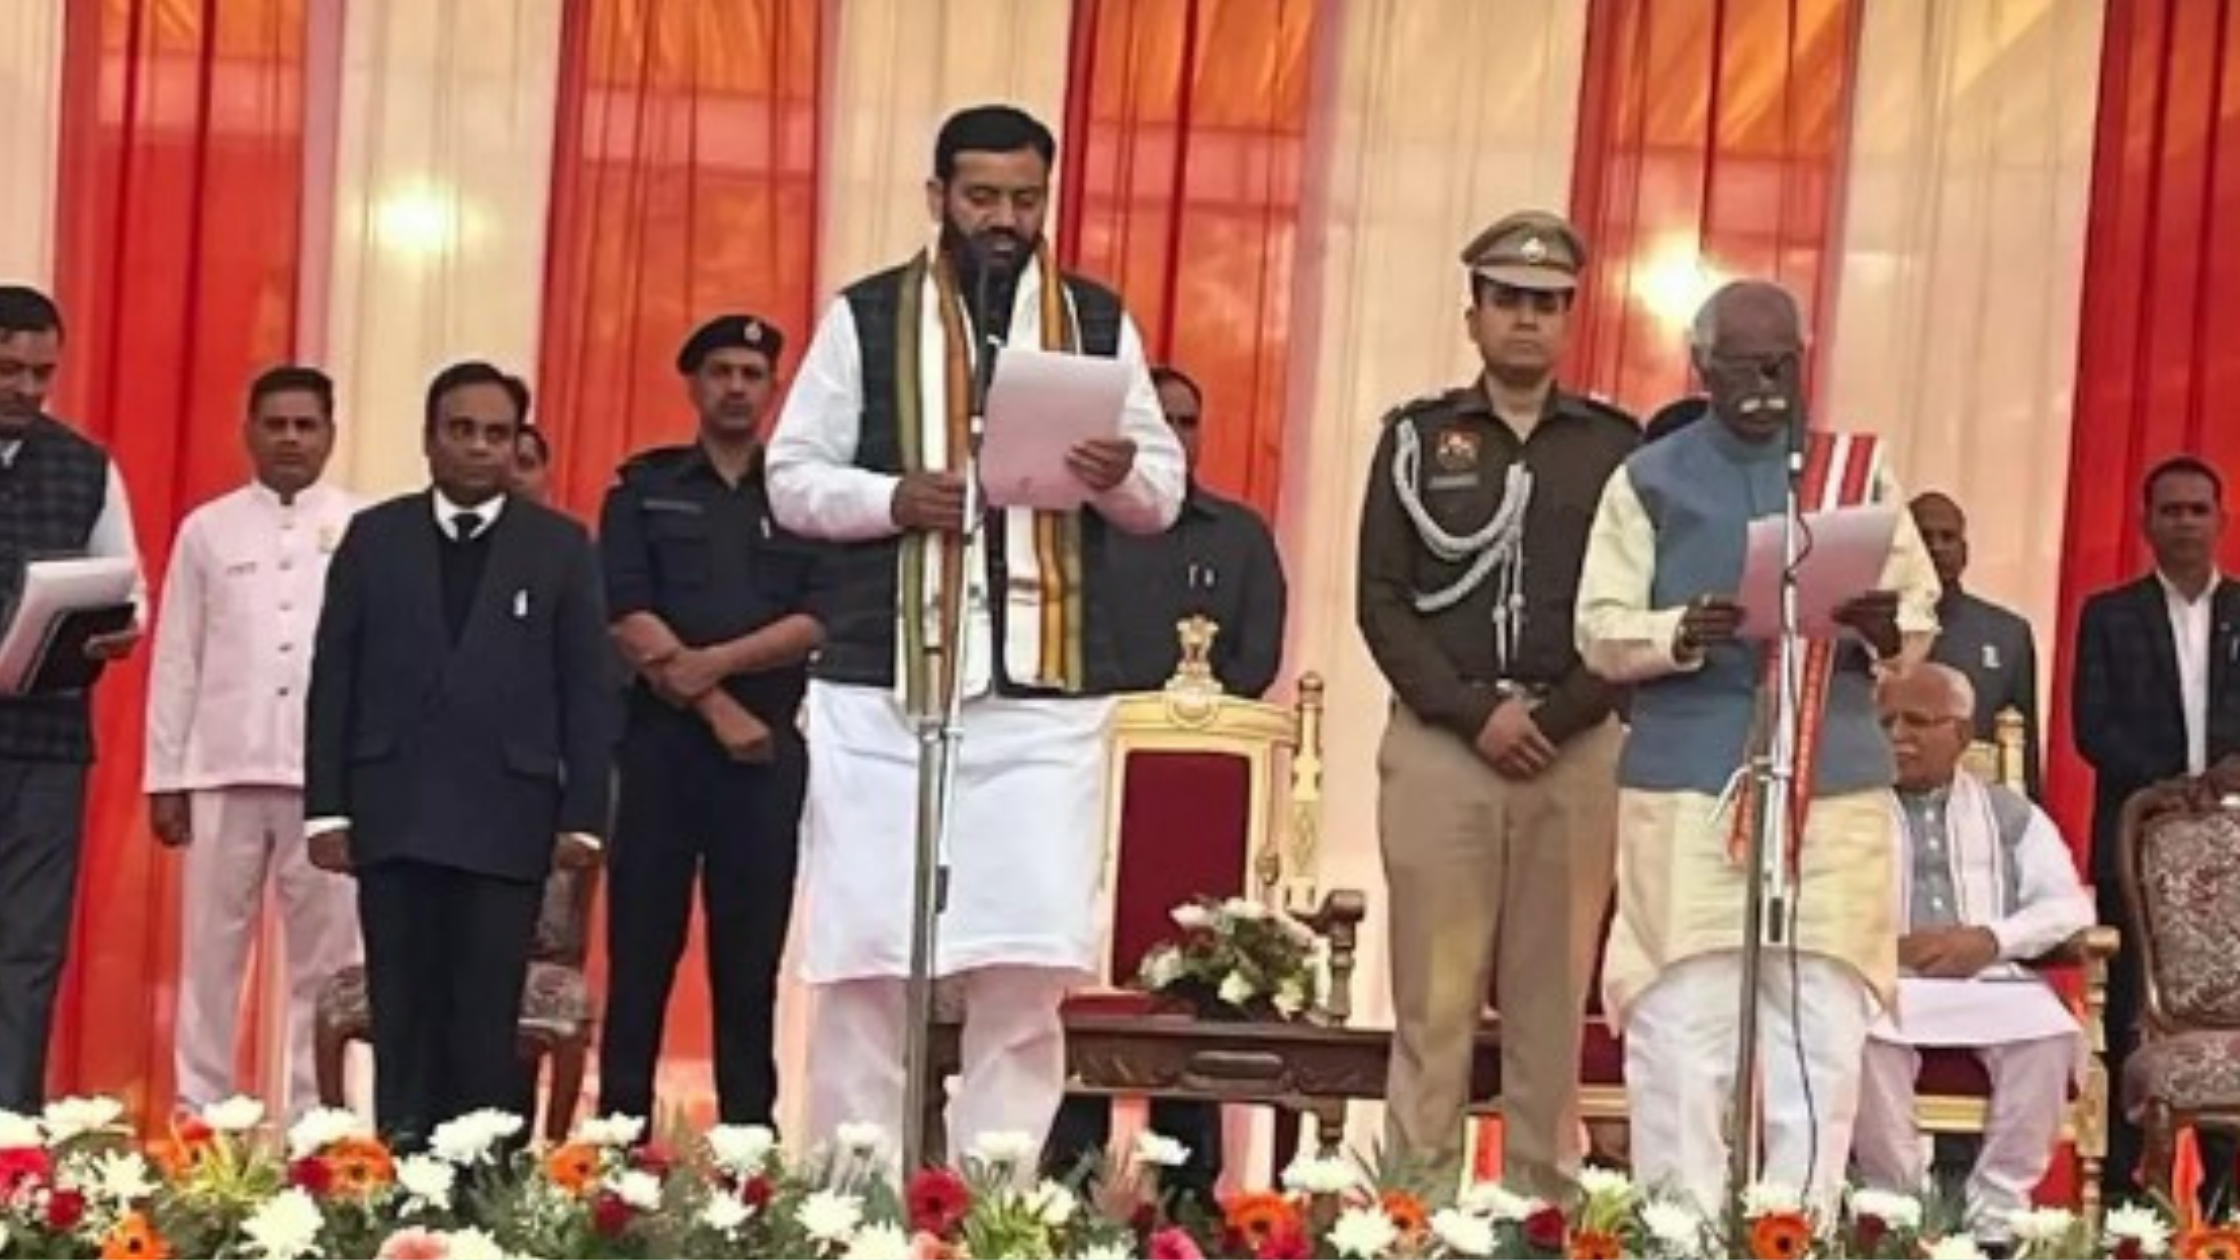 Haryana New CM: Naib Saini became the Chief Minister of Haryana, 5 ministers also took oath